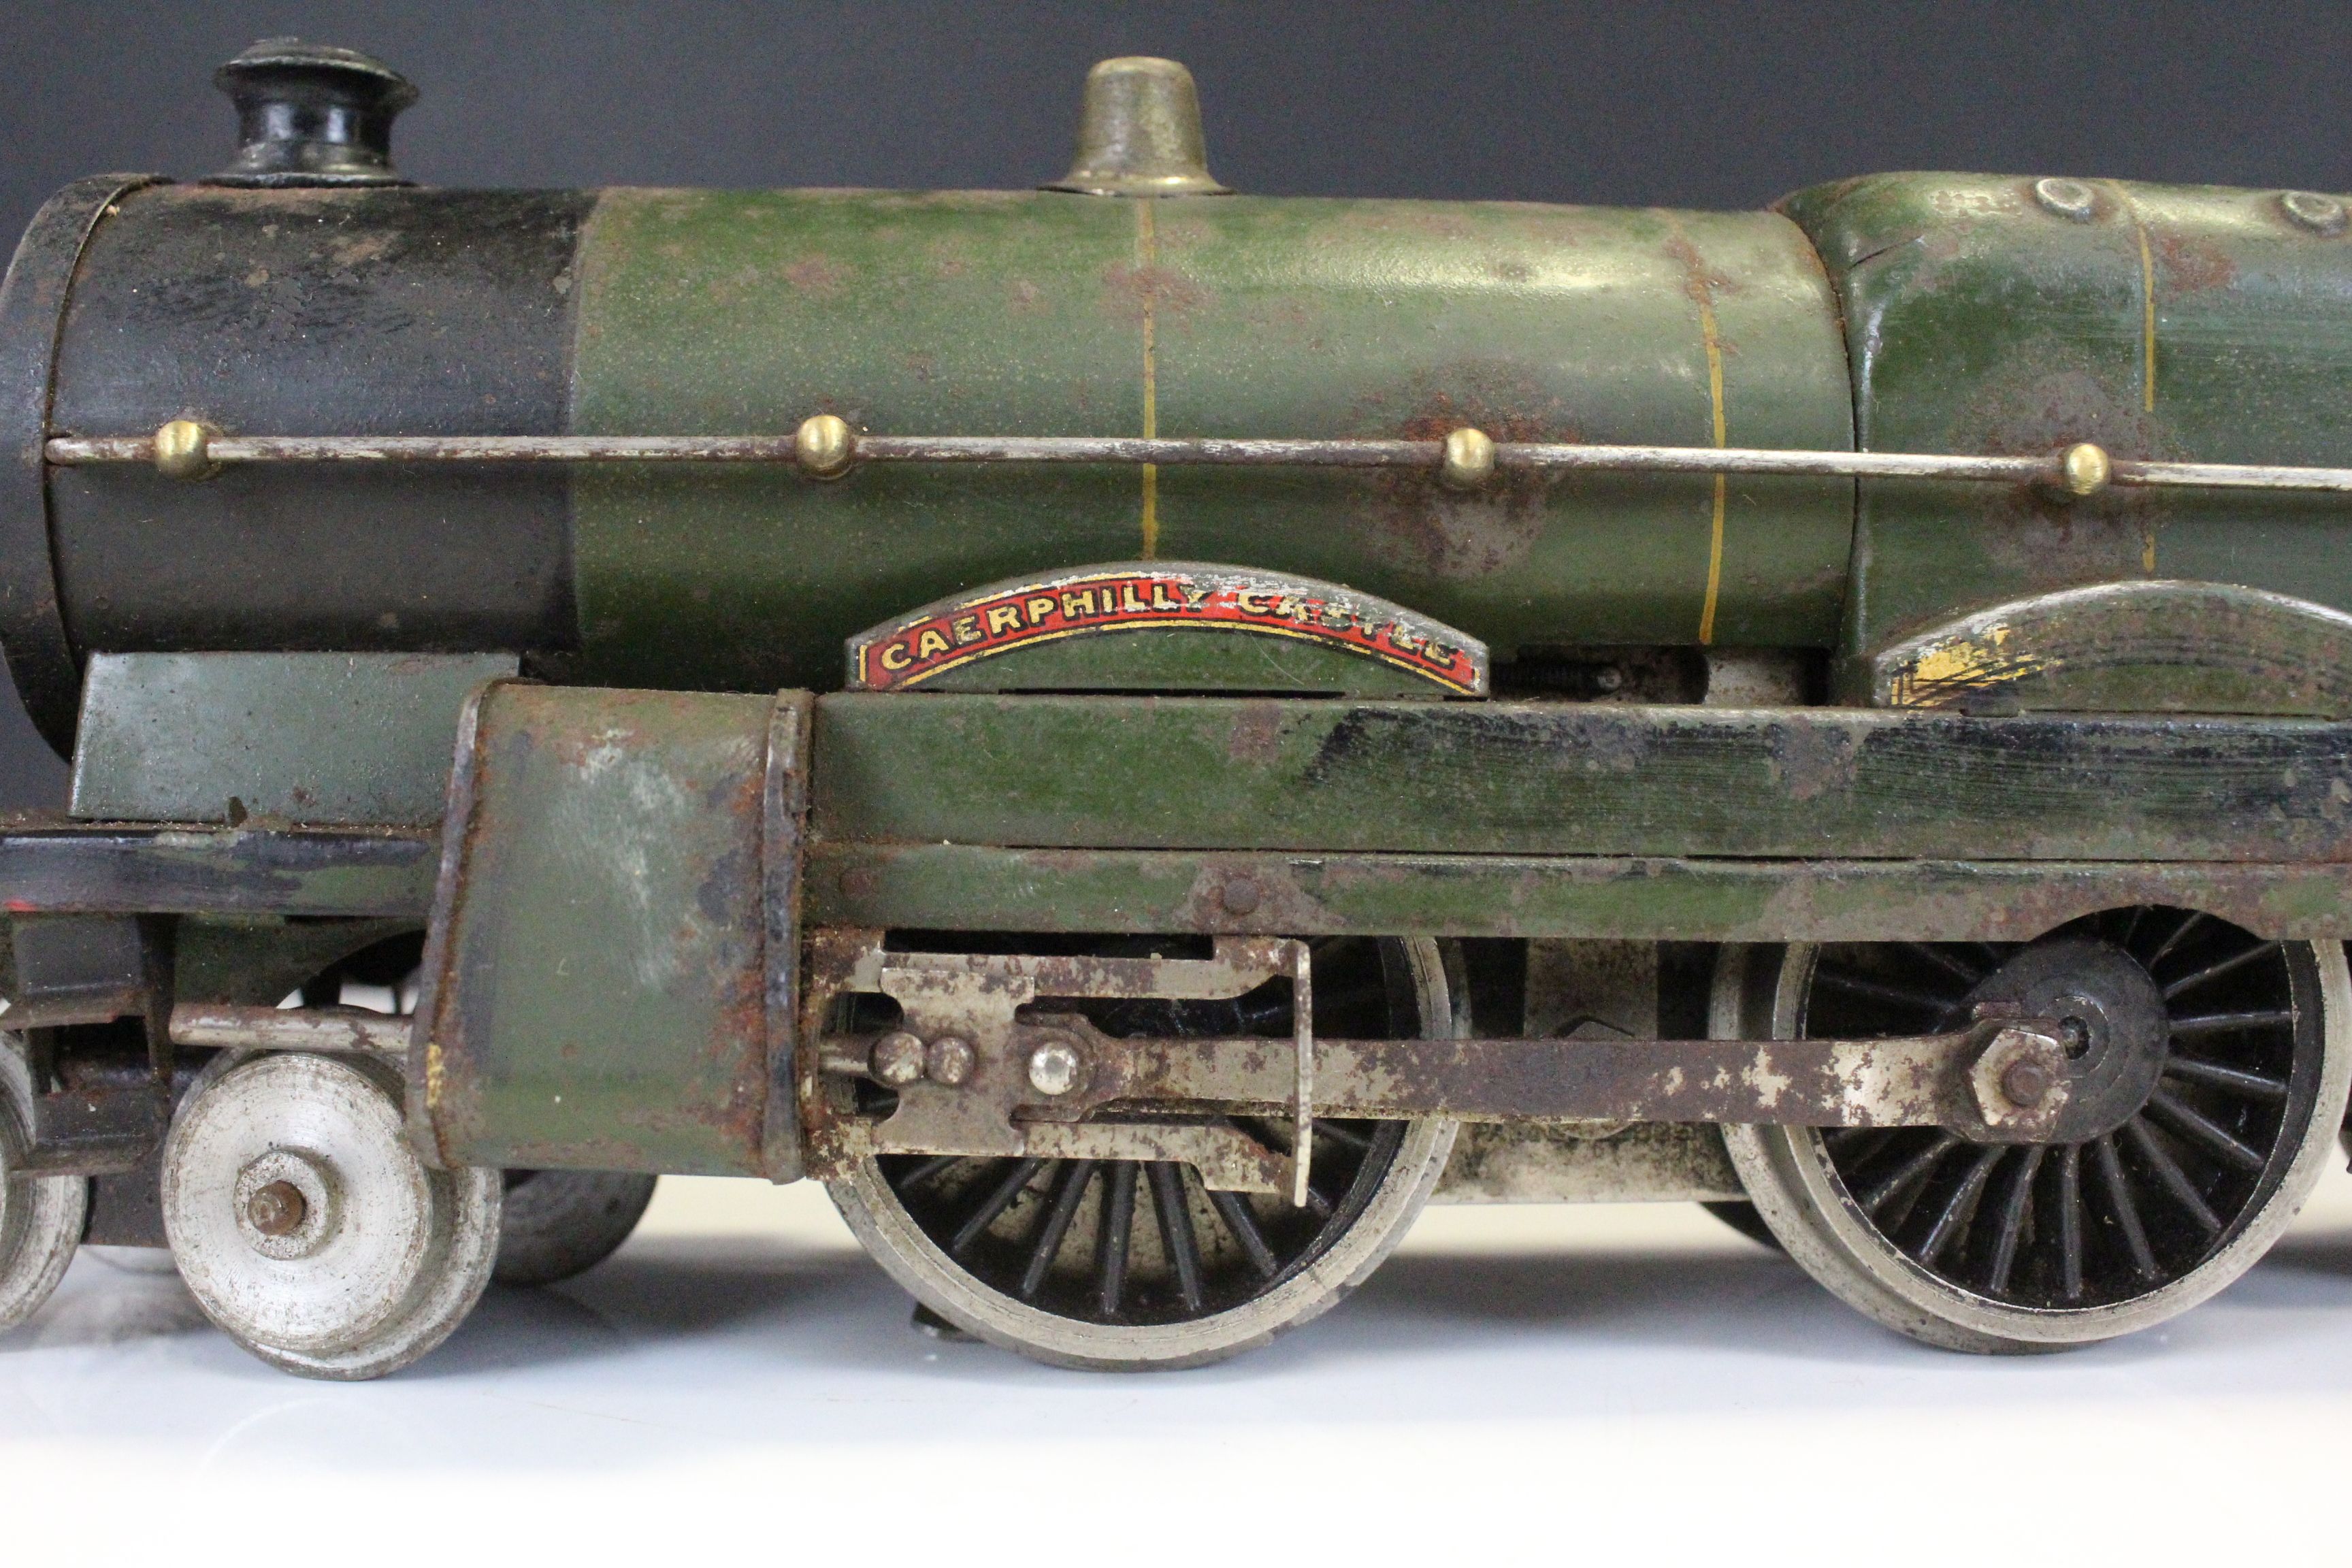 Hornby O gauge Caerphilly Castle 4-4-2 4073 GWR locomotive with tender, play worn - Image 4 of 7